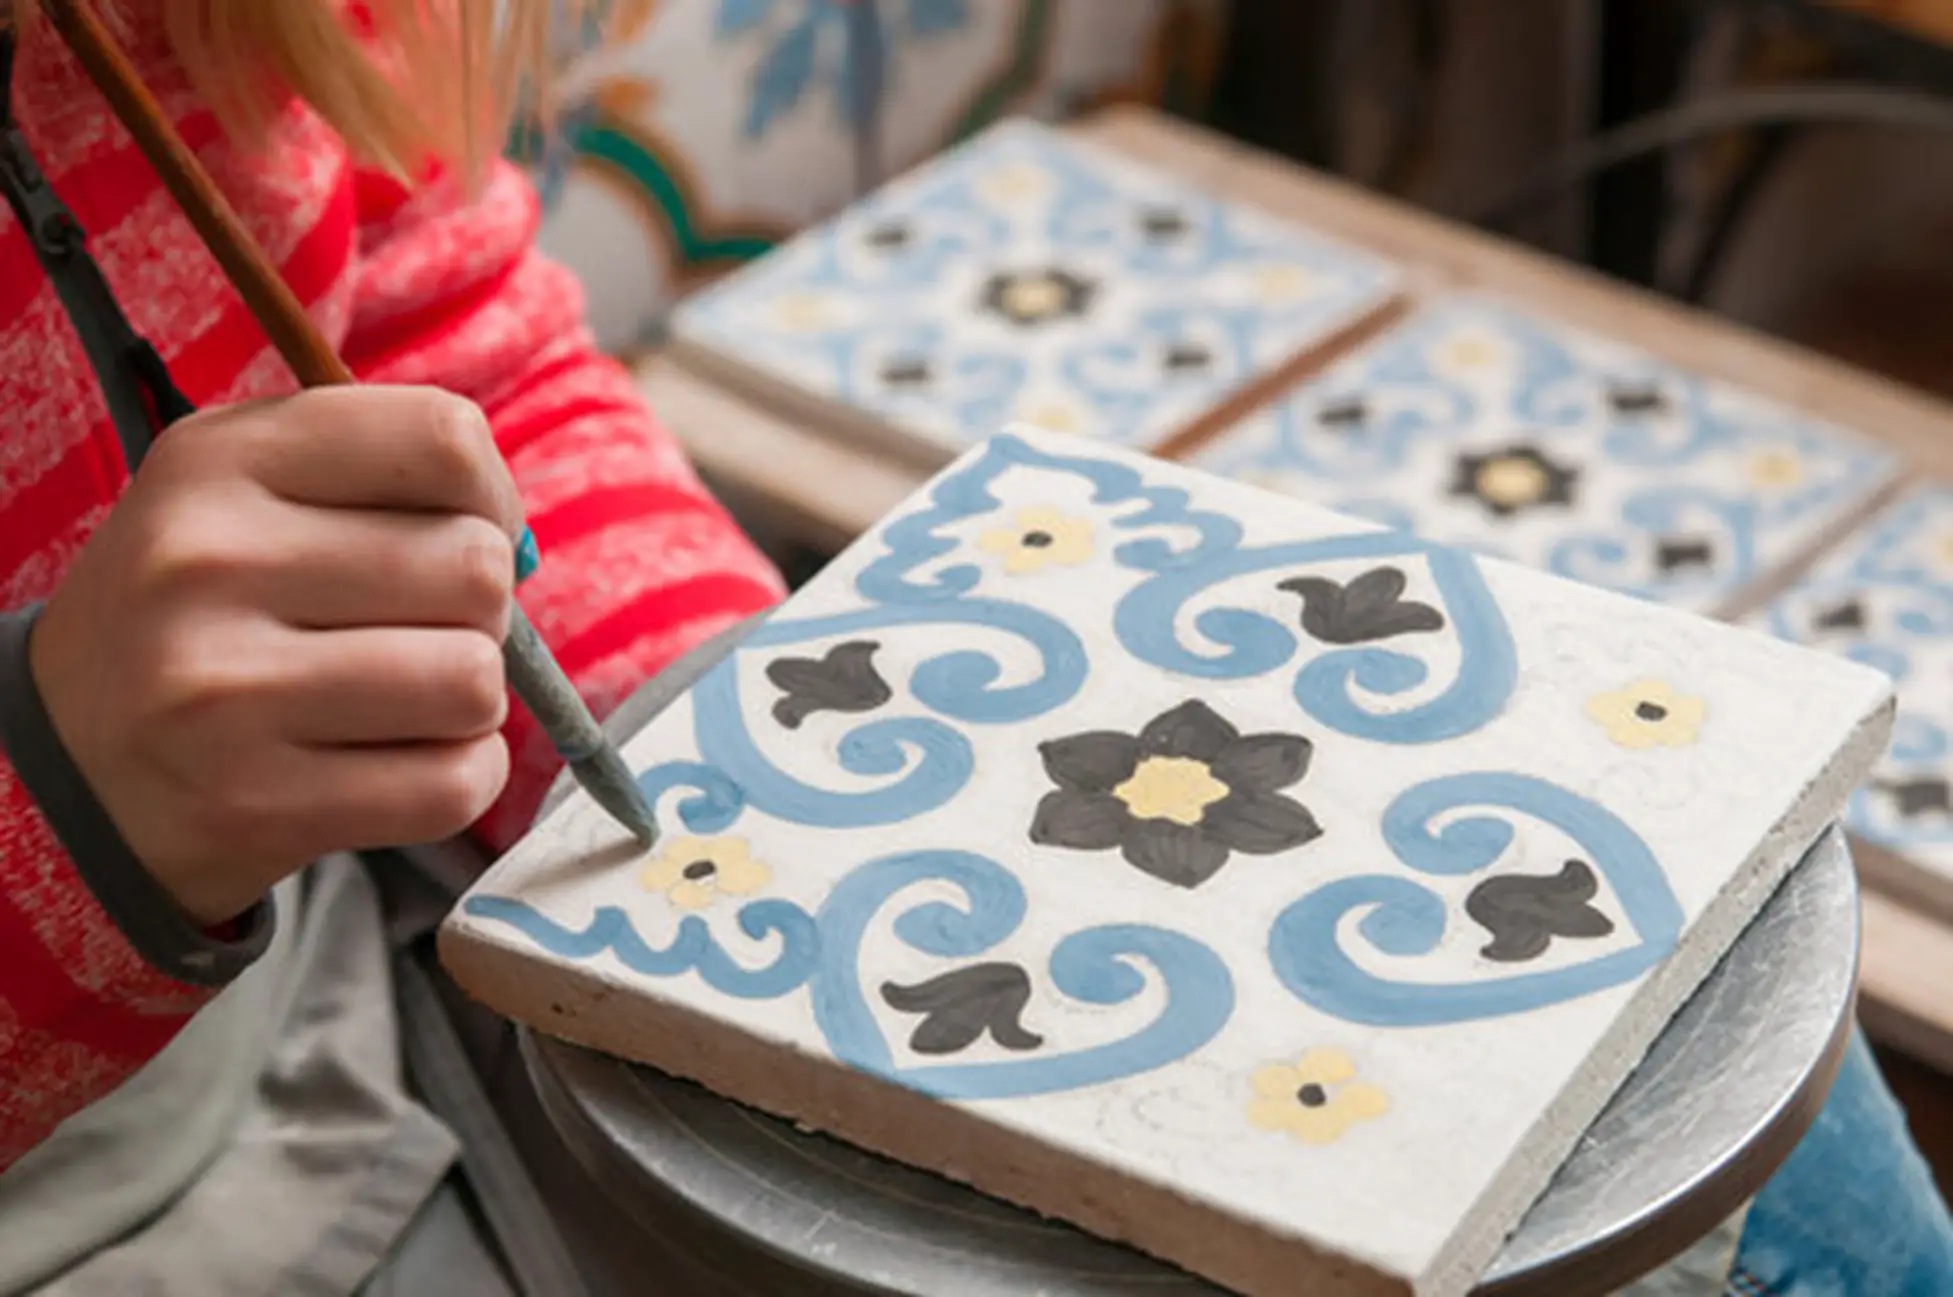 How To Make A Pottery Tile?